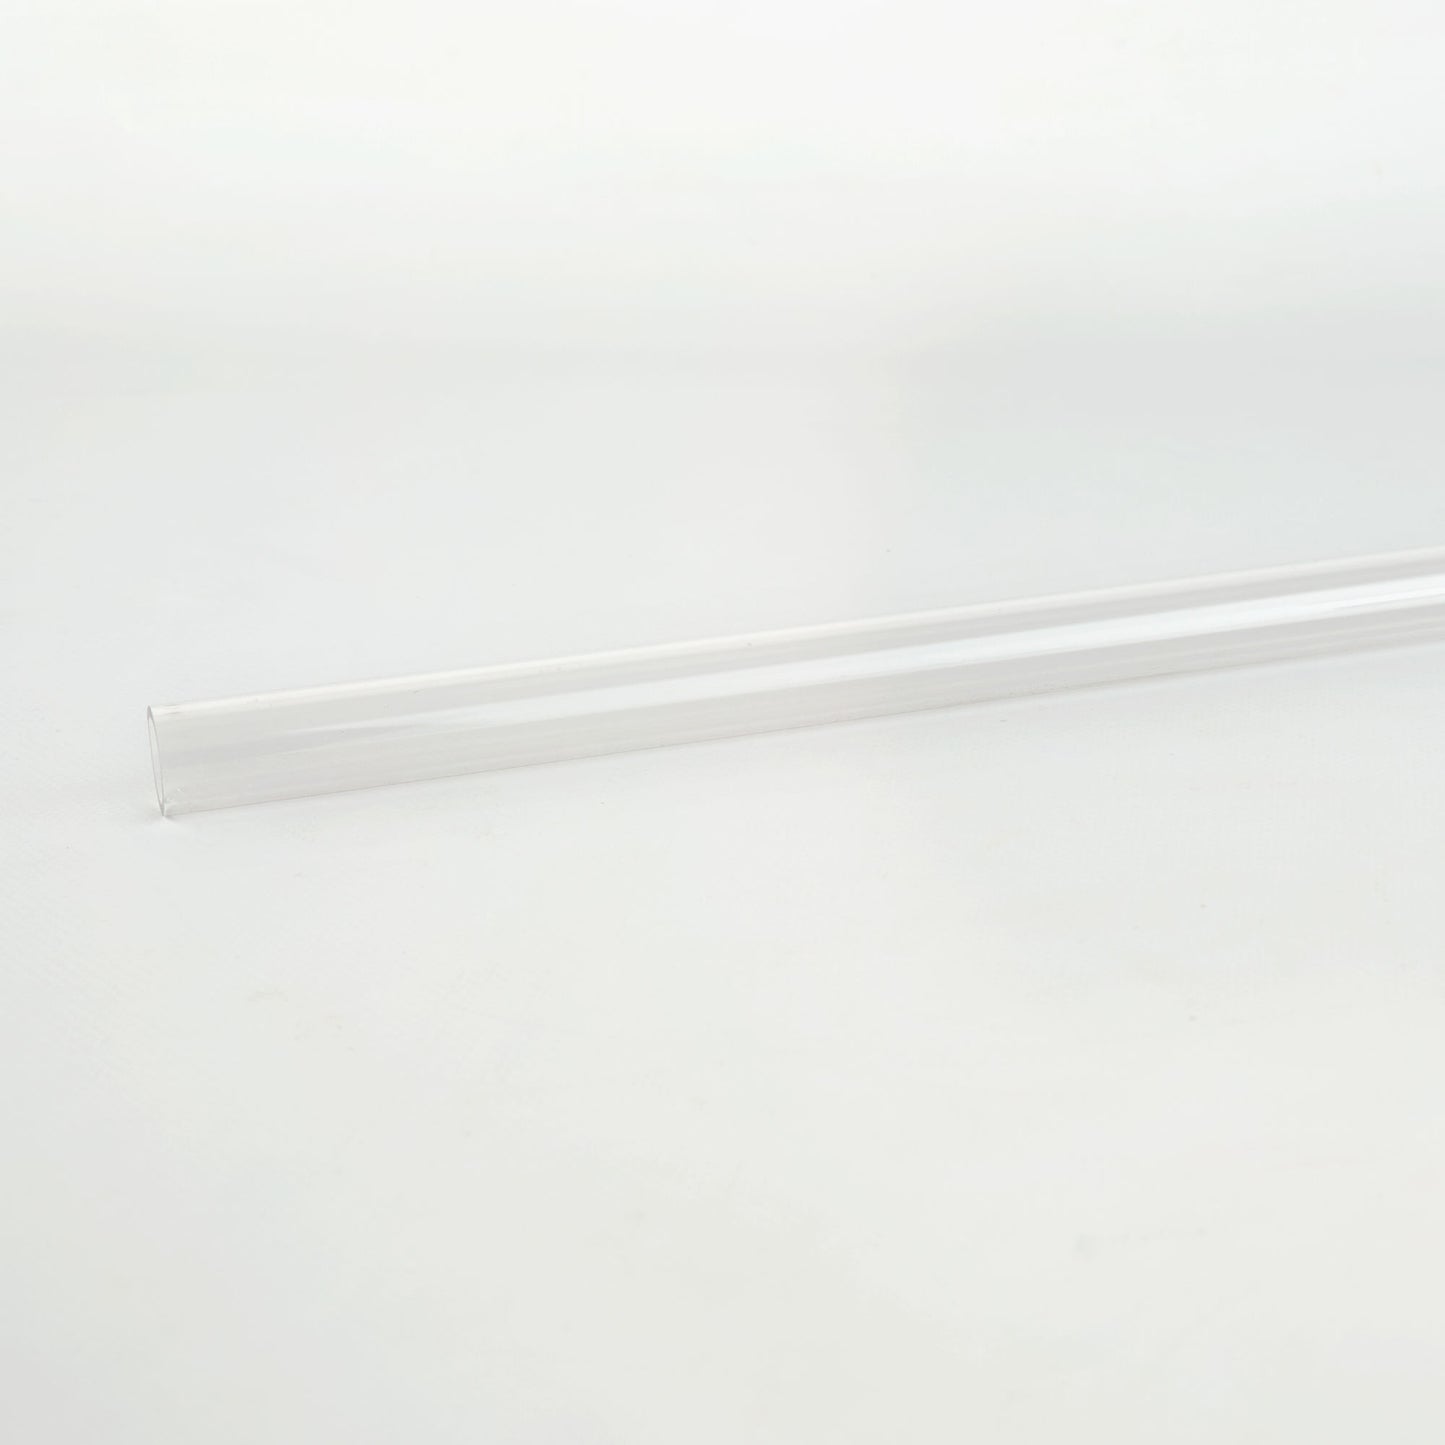 19mm x 15mm Polycarbonate Tube Clear